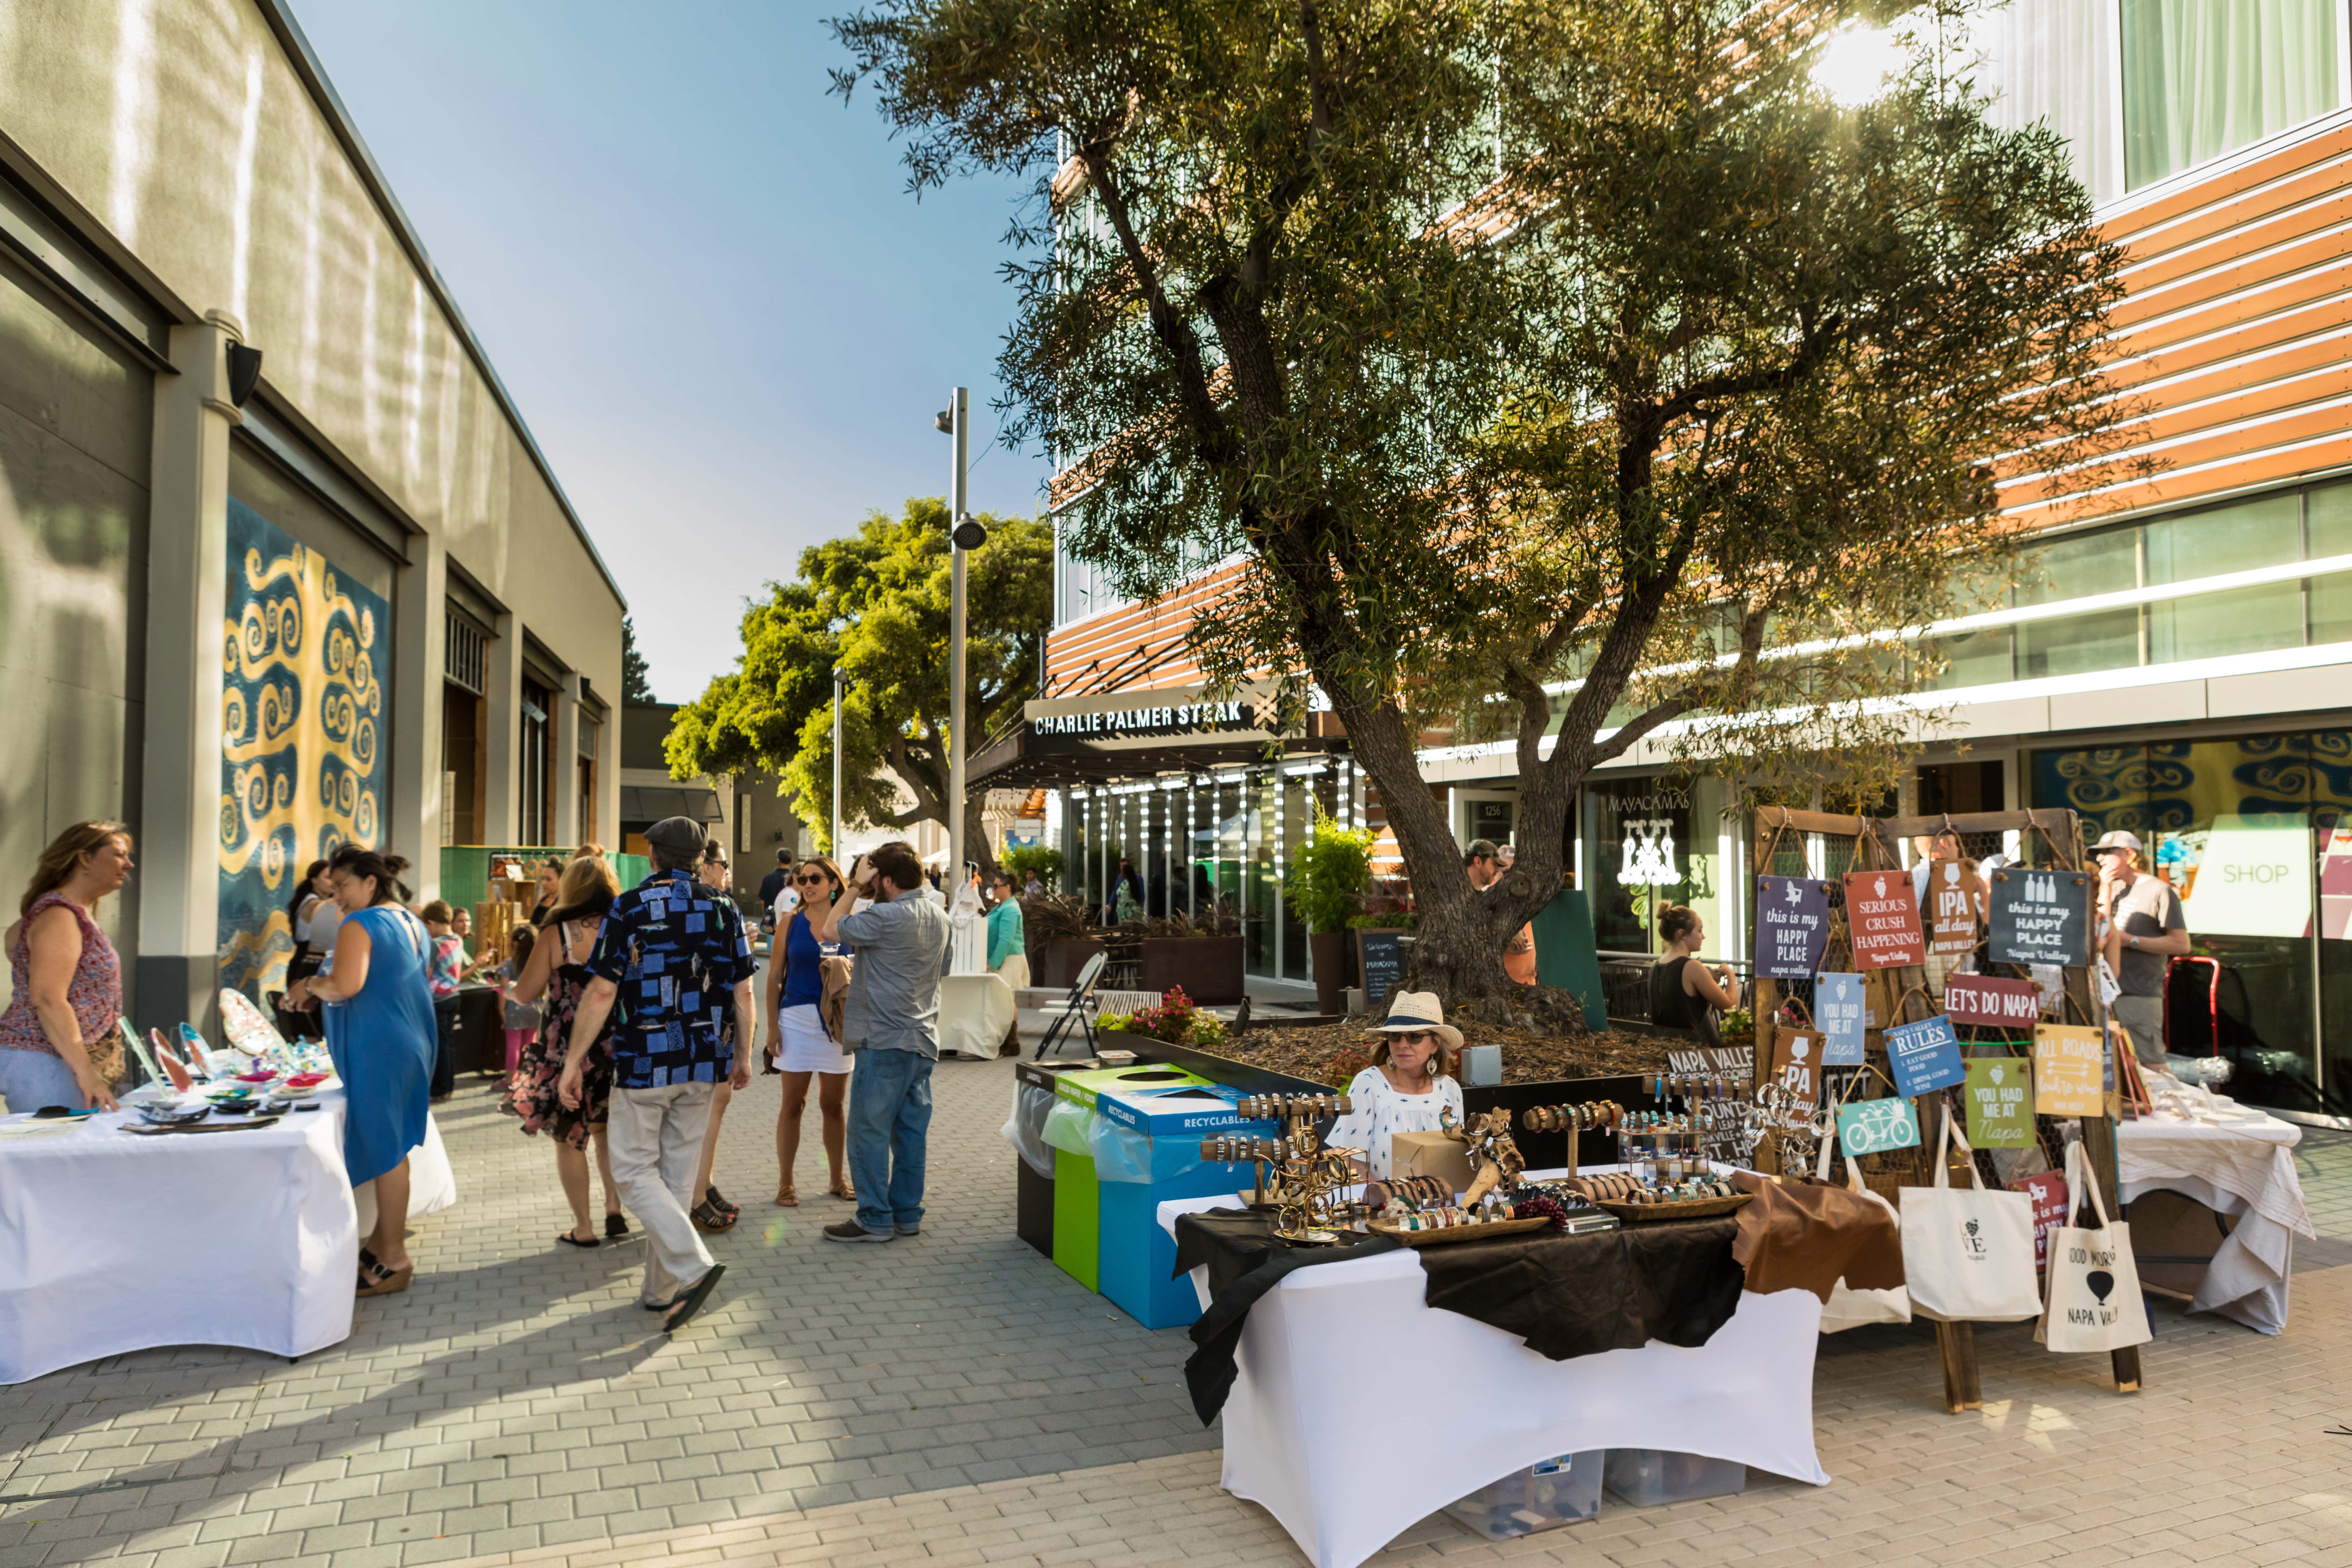 The First Street Napa community offers distinctive fashion, gift and décor retailers, fine wine and dining options, along with a boutique hotel and creative office spaces.